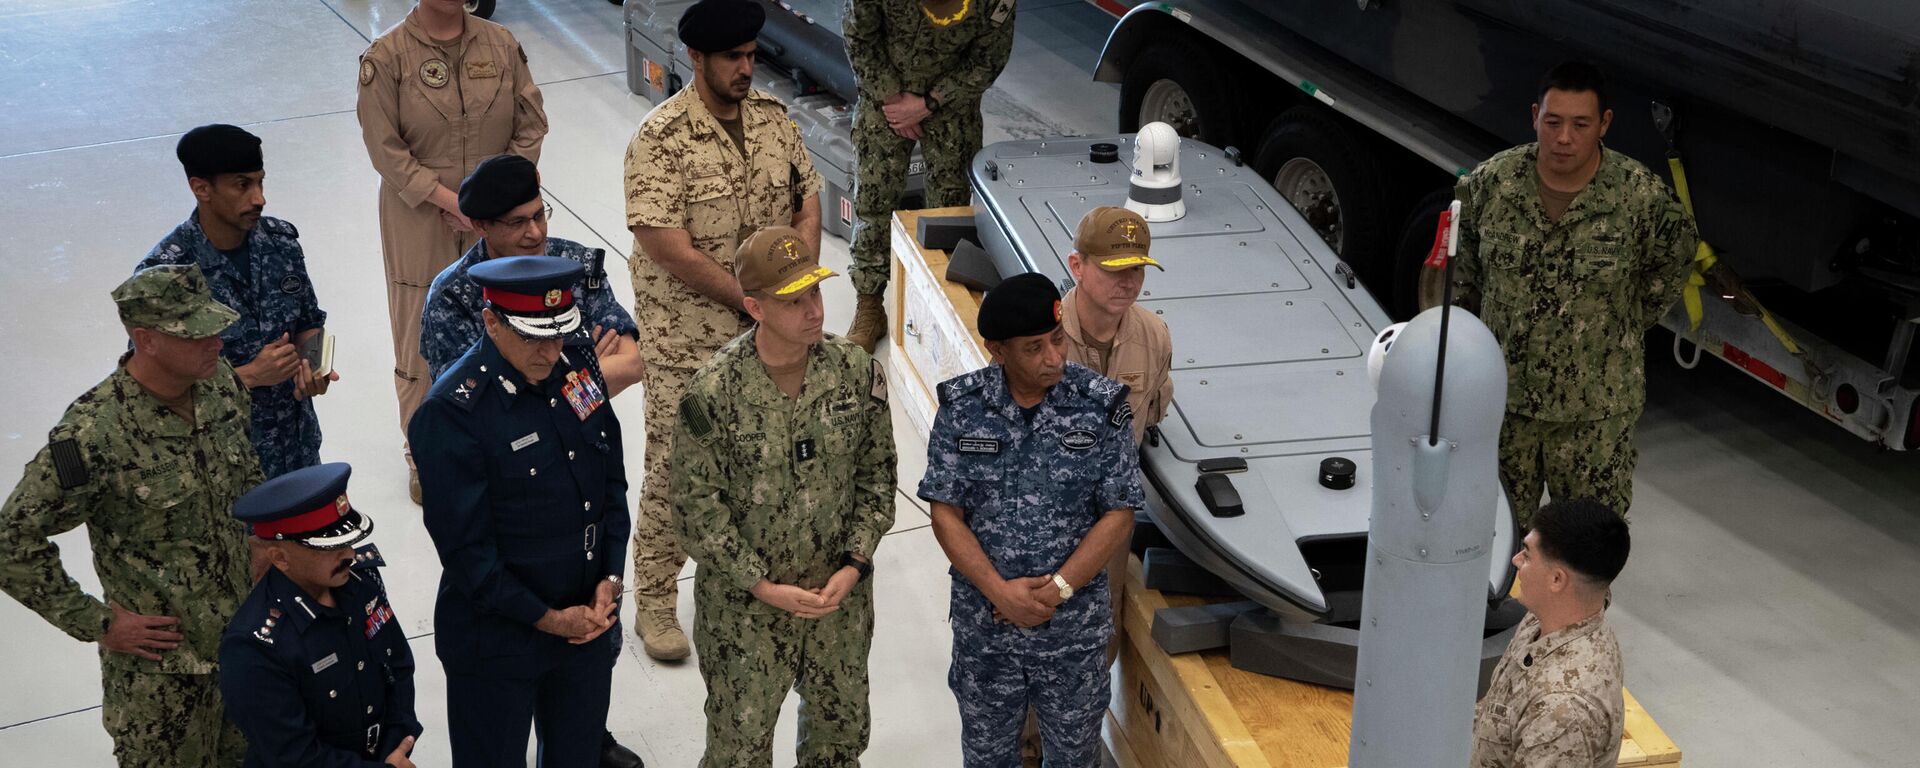 NAVAL SUPPORT ACTIVITY BAHRAIN (Sept. 23, 2021) Vice Adm. Brad Cooper, commander of U.S. Naval Forces Central Command (NAVCENT), U.S. 5th Fleet, and Combined Maritime Forces, center right, along with Major Gen. Ala Abdulla Seyadi, commander of the Bahrain Coast Guard, center left; and Rear Adm - Sputnik International, 1920, 27.09.2021